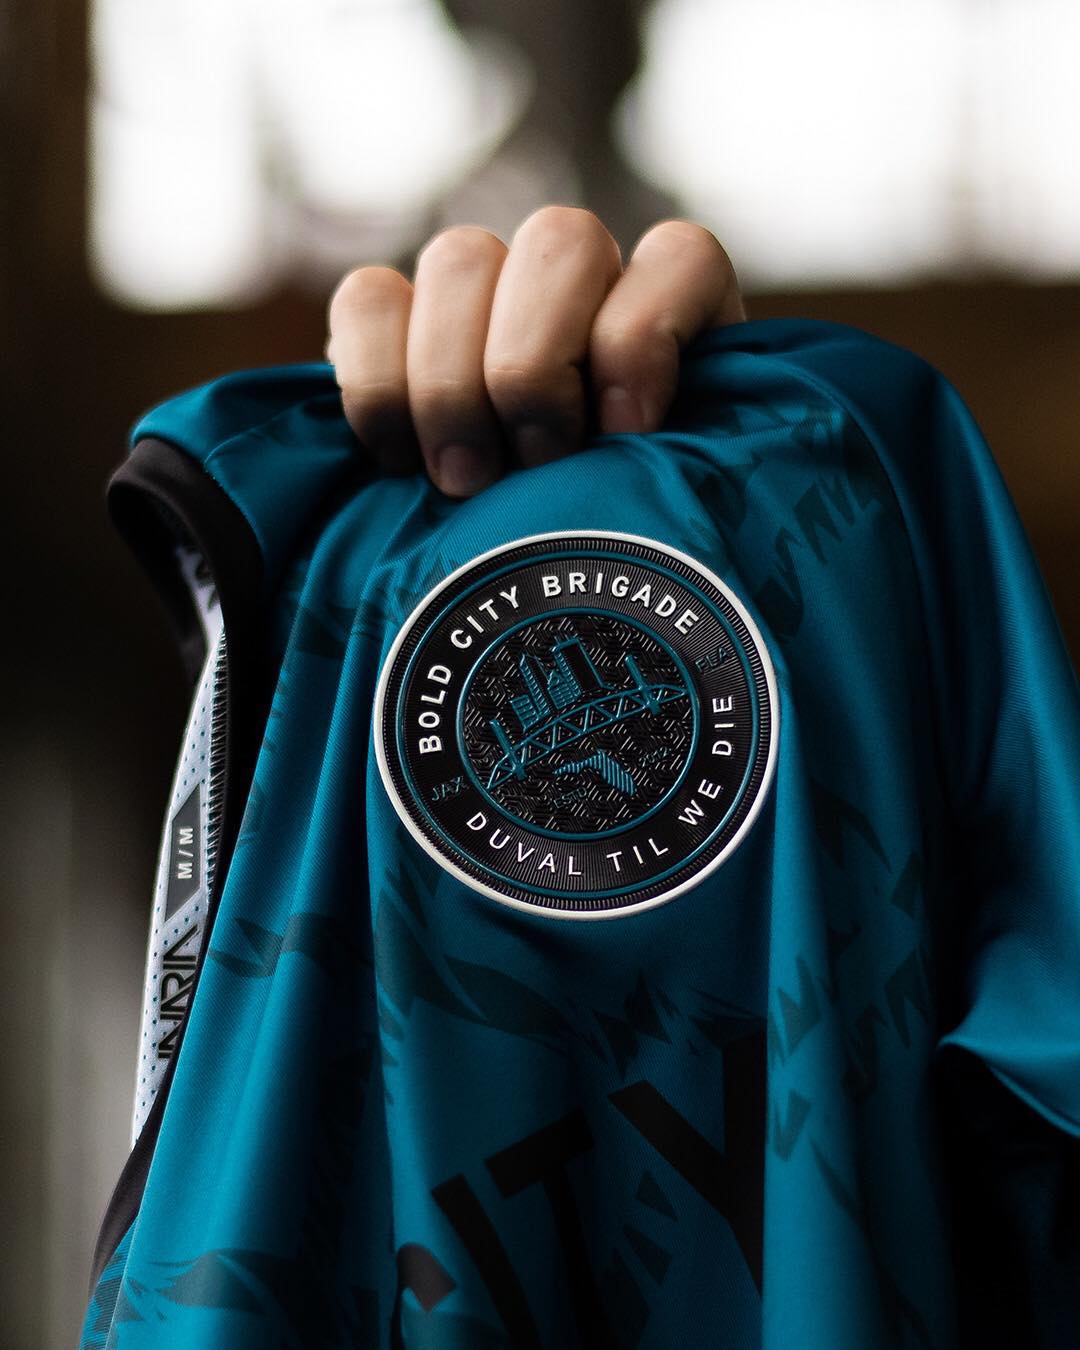 A new type of football kit. @jaguars supporters group @boldcitybrigade drop this limited edition piece. Now available on their site. Link in their bio. #inariasoccer